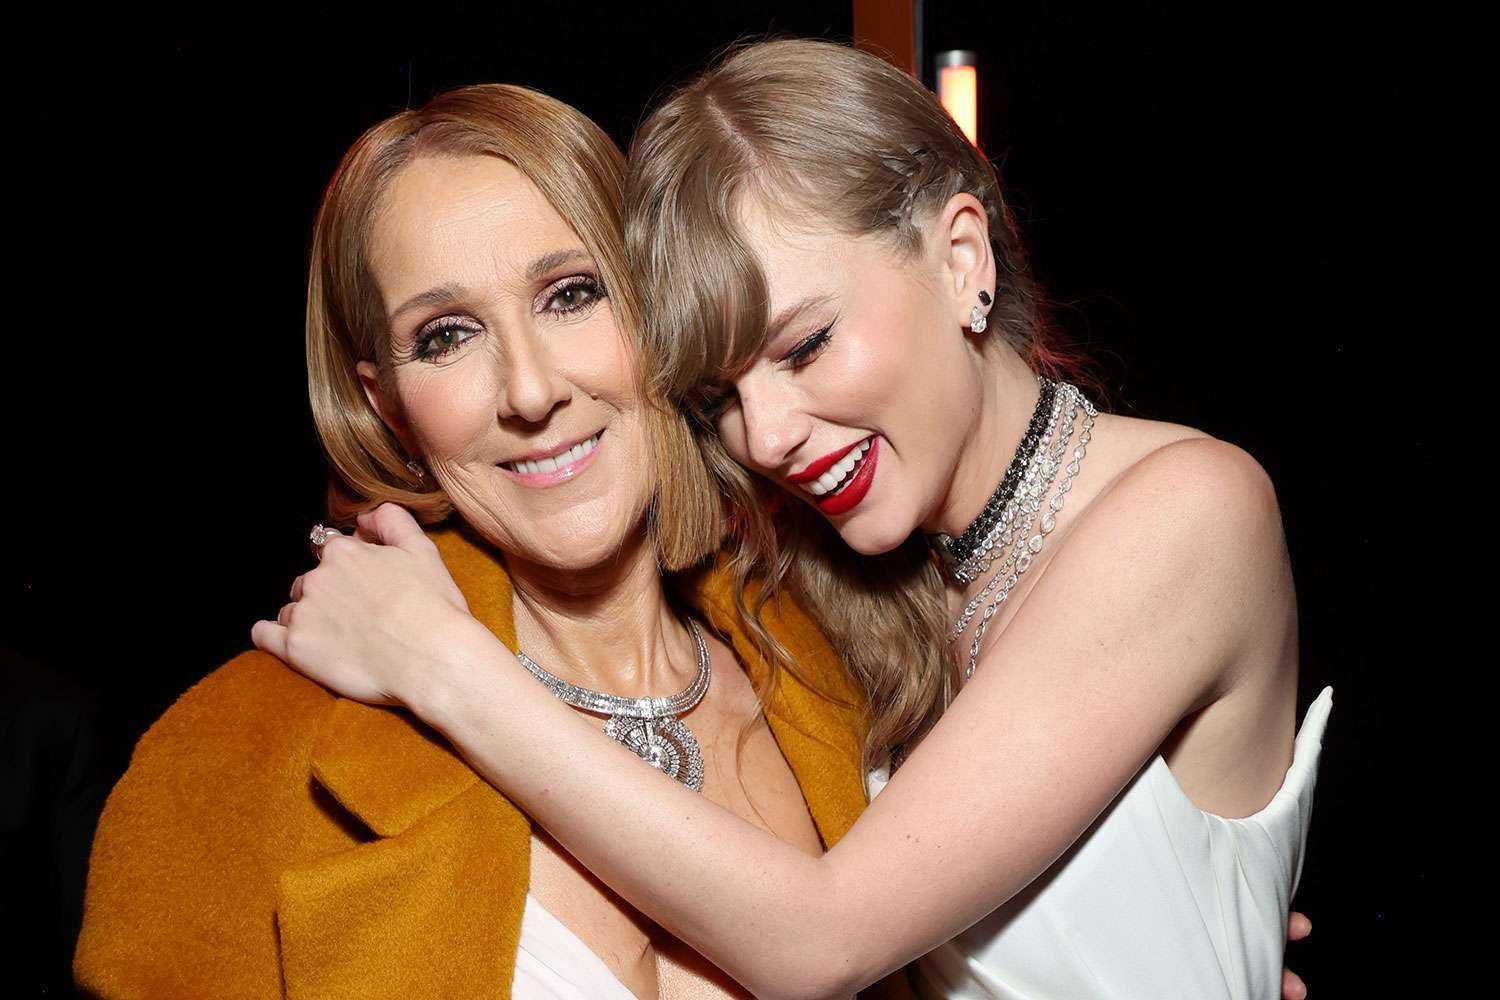 Celion Dion and Taylor Swift at the Grammys (Source: Instagram)